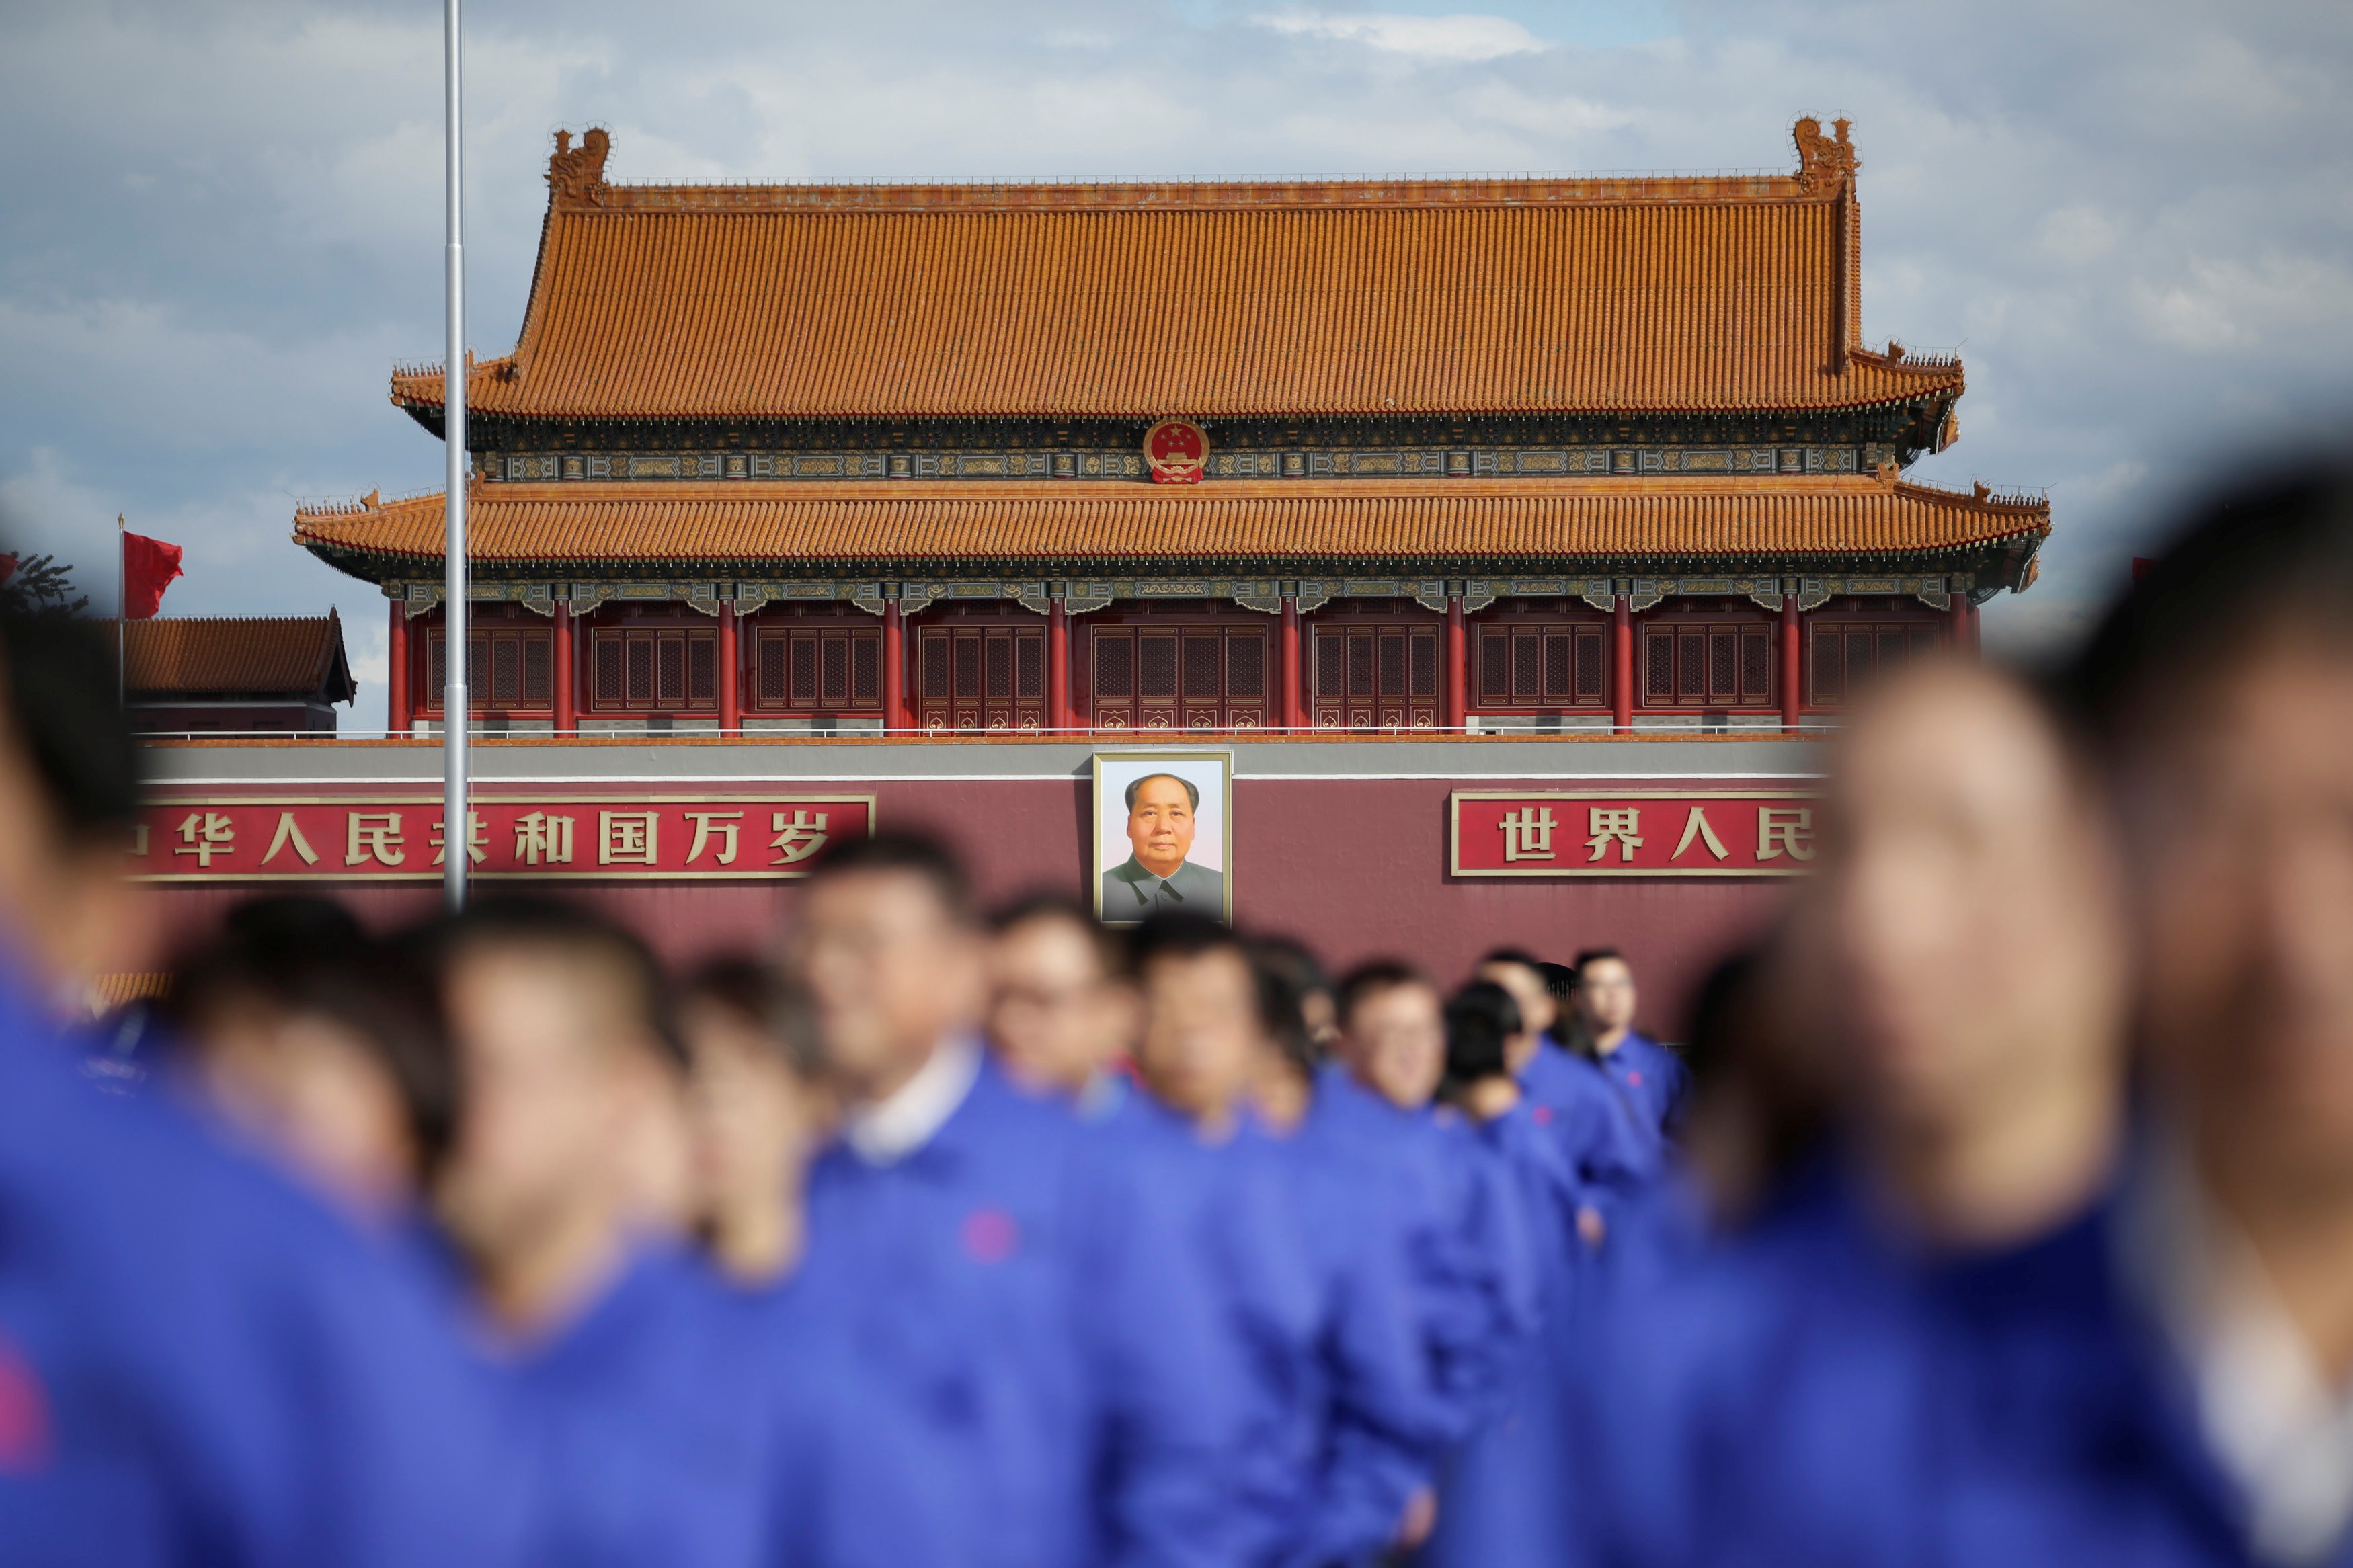 Workers attend a ceremony to mark the 69th anniversary of the founding of the People’s Republic of China on September 30 in Tiananmen Square. Can the Chinese Communist Party continue to produce leadership that’s adequate to the challenges China faces? Photo: Reuters